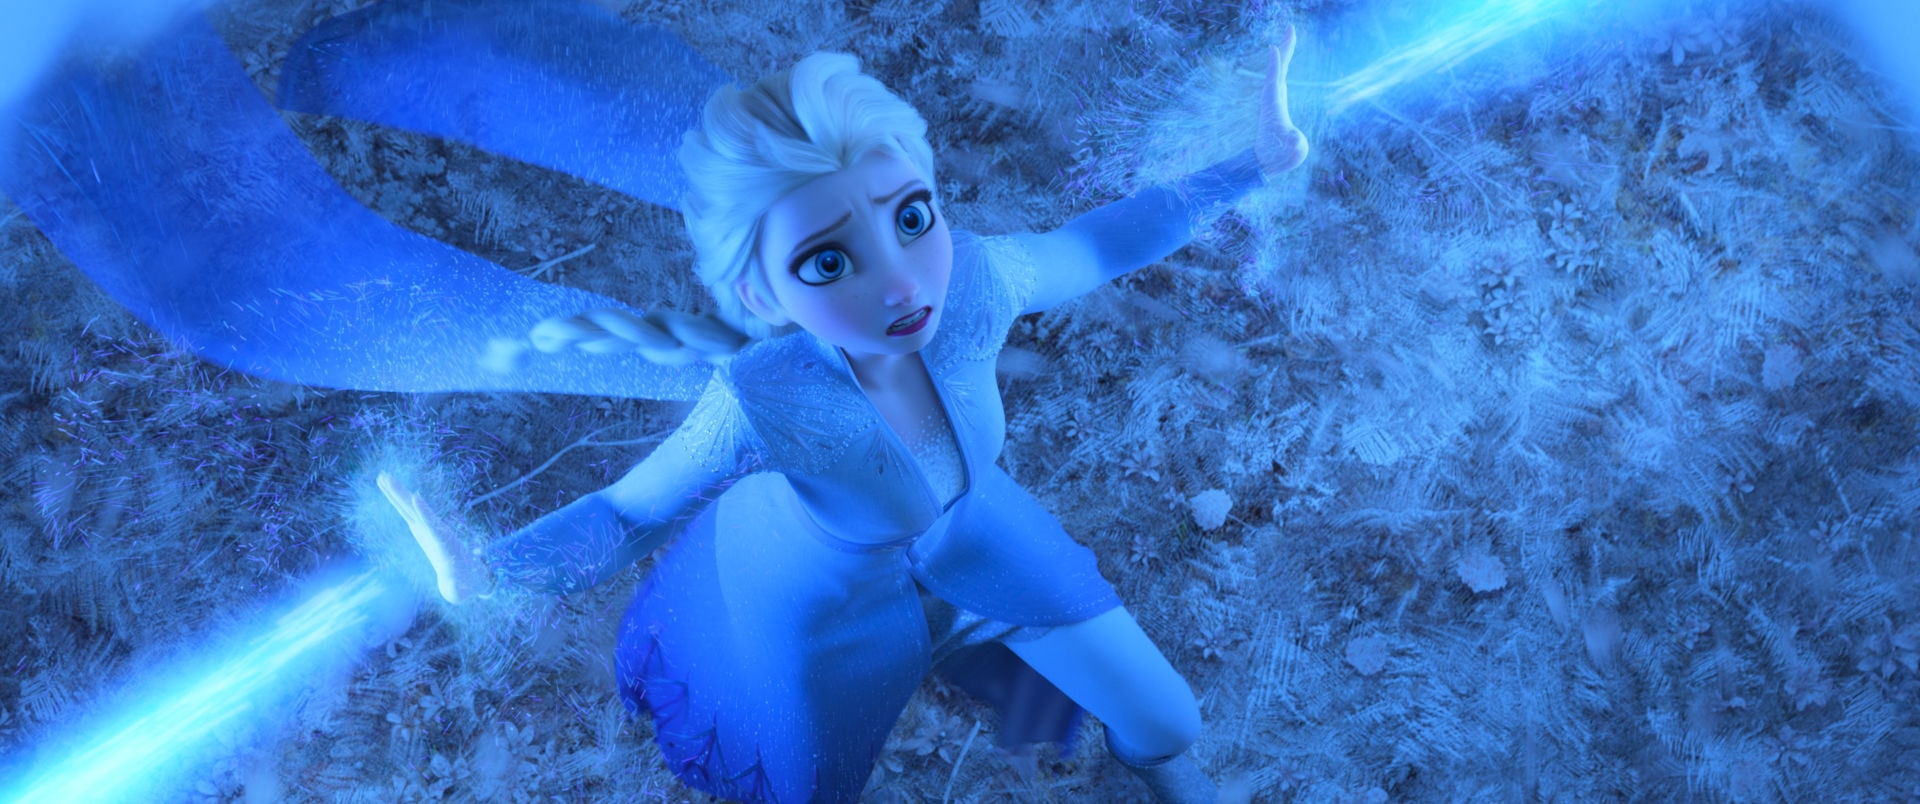 Houston family haunted by Elsa doll from Disney's Frozen | SYFY WIRE